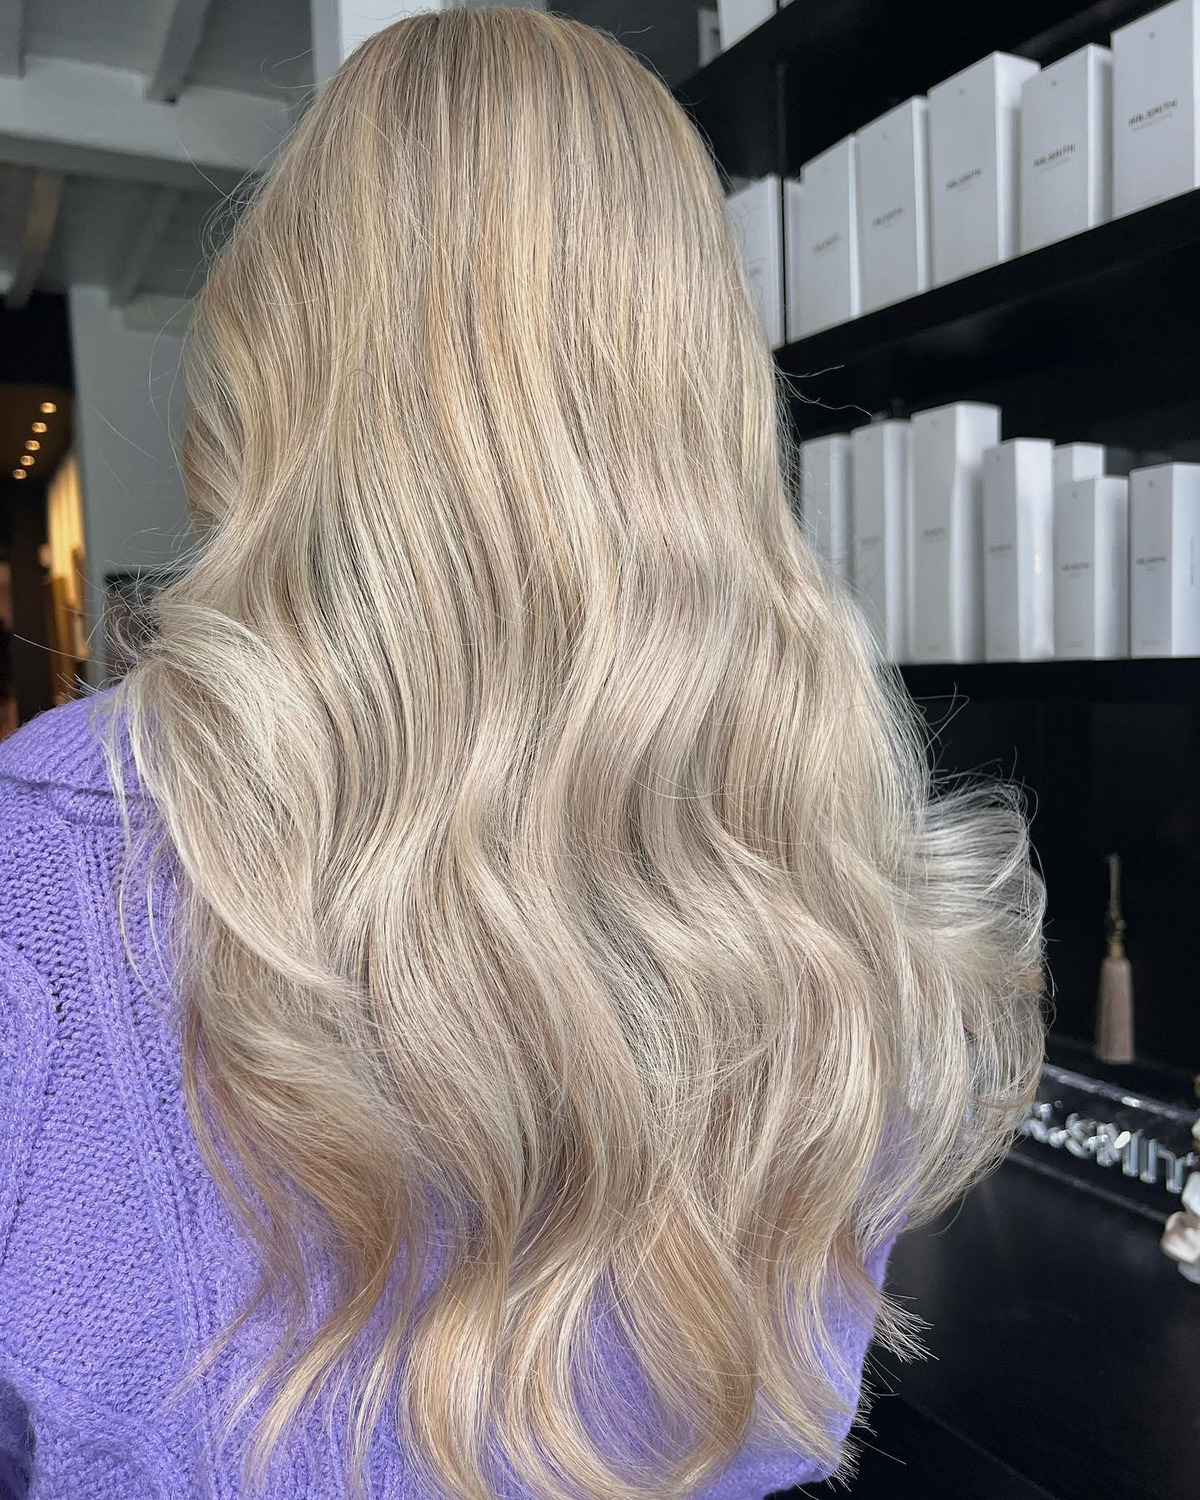  All-Over Ash Blonde